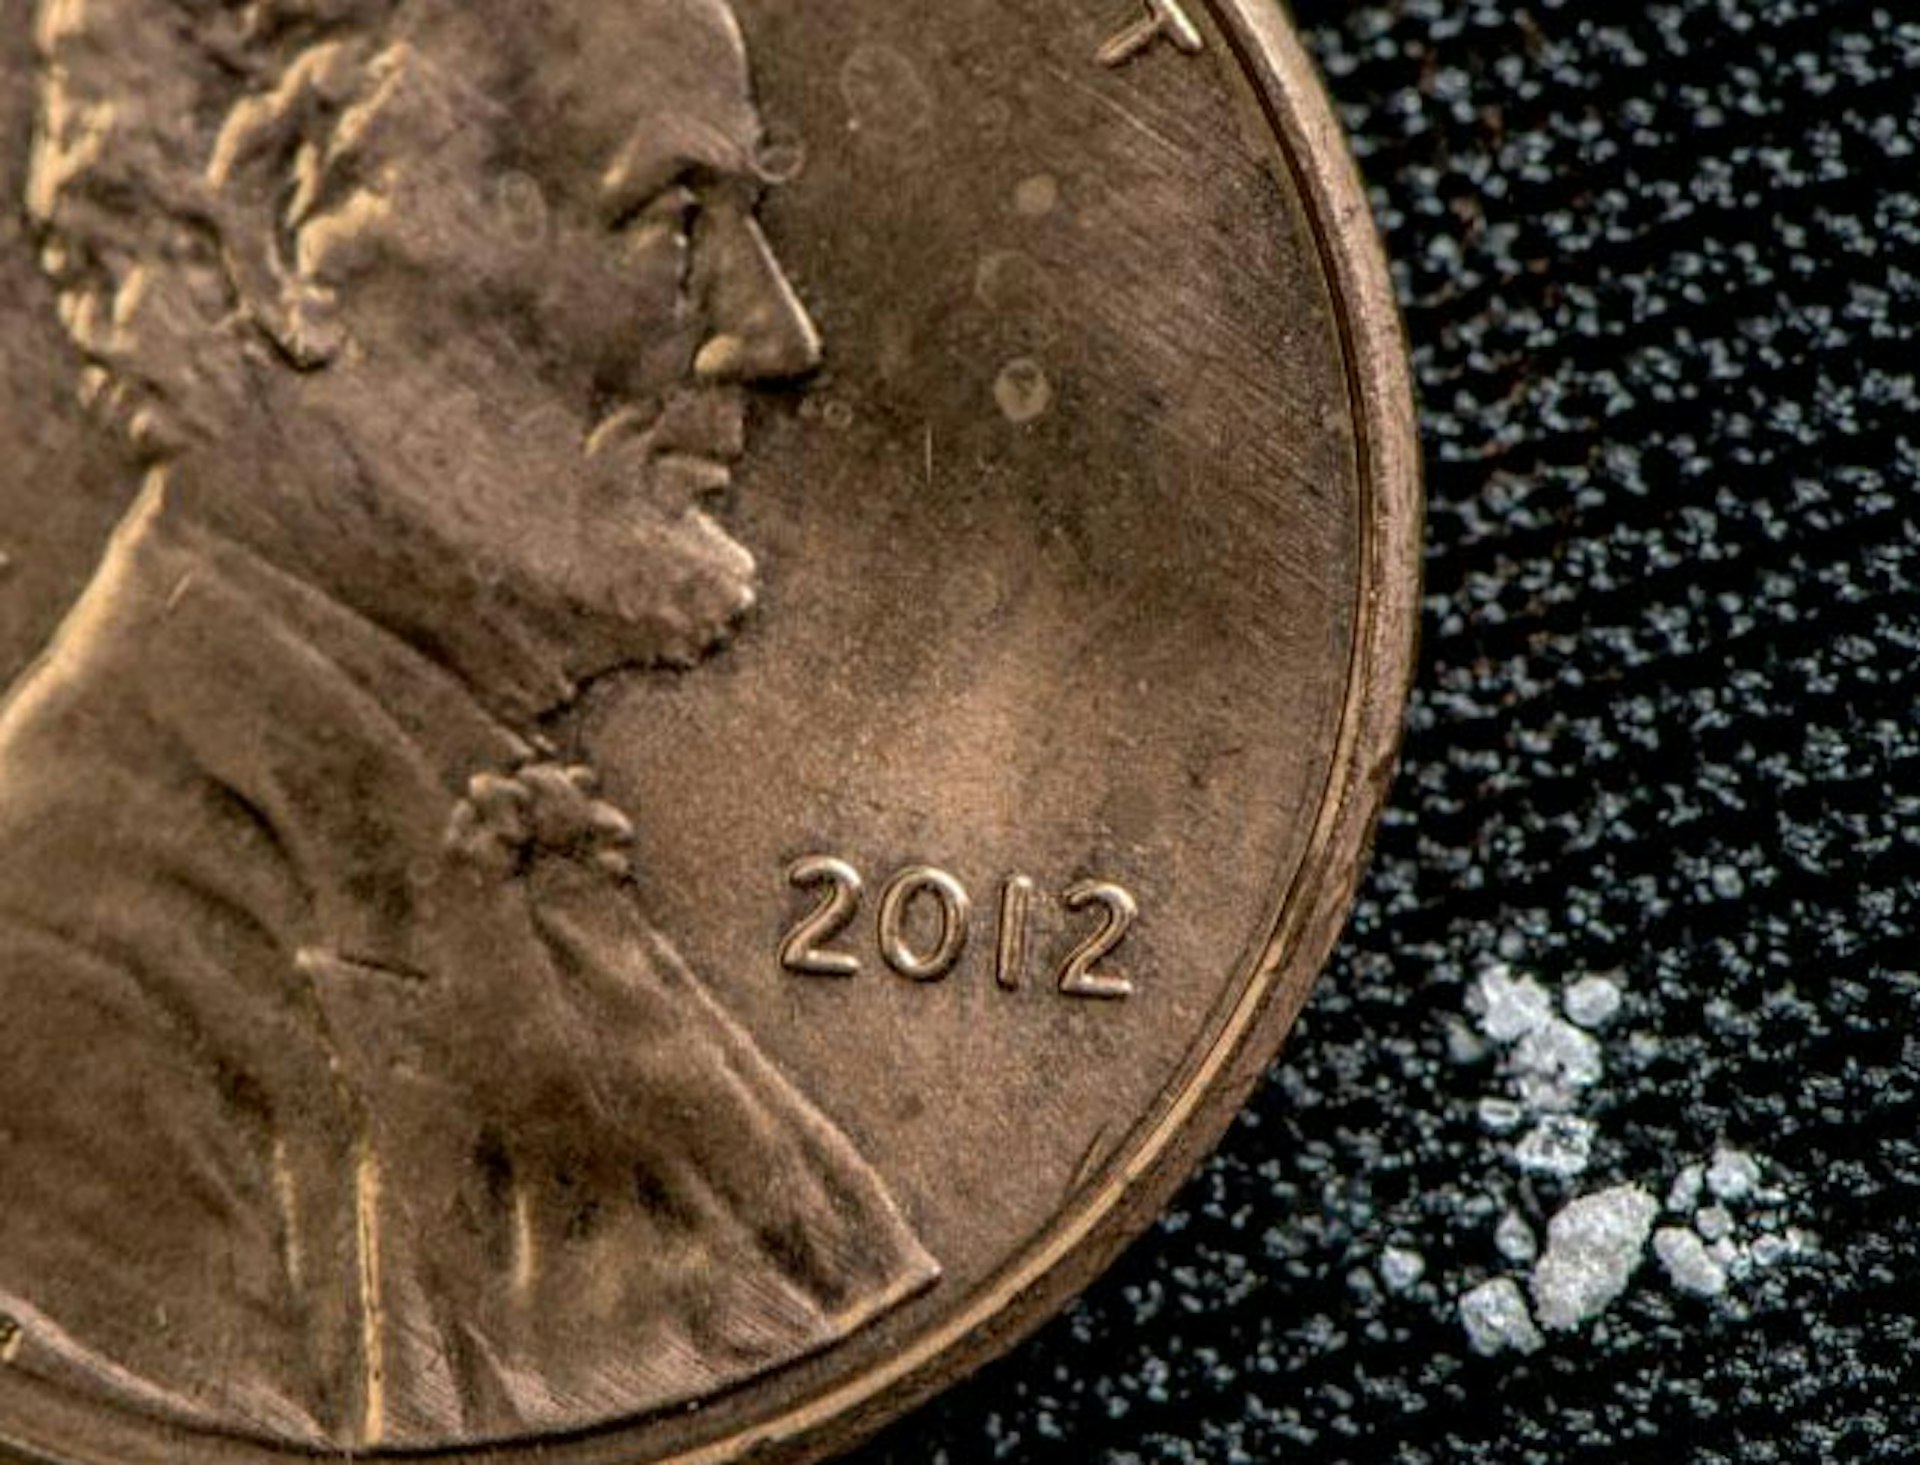 Just two milligrams of fentanyl appears as a few grains of sand in comparison to a U.S. penny.